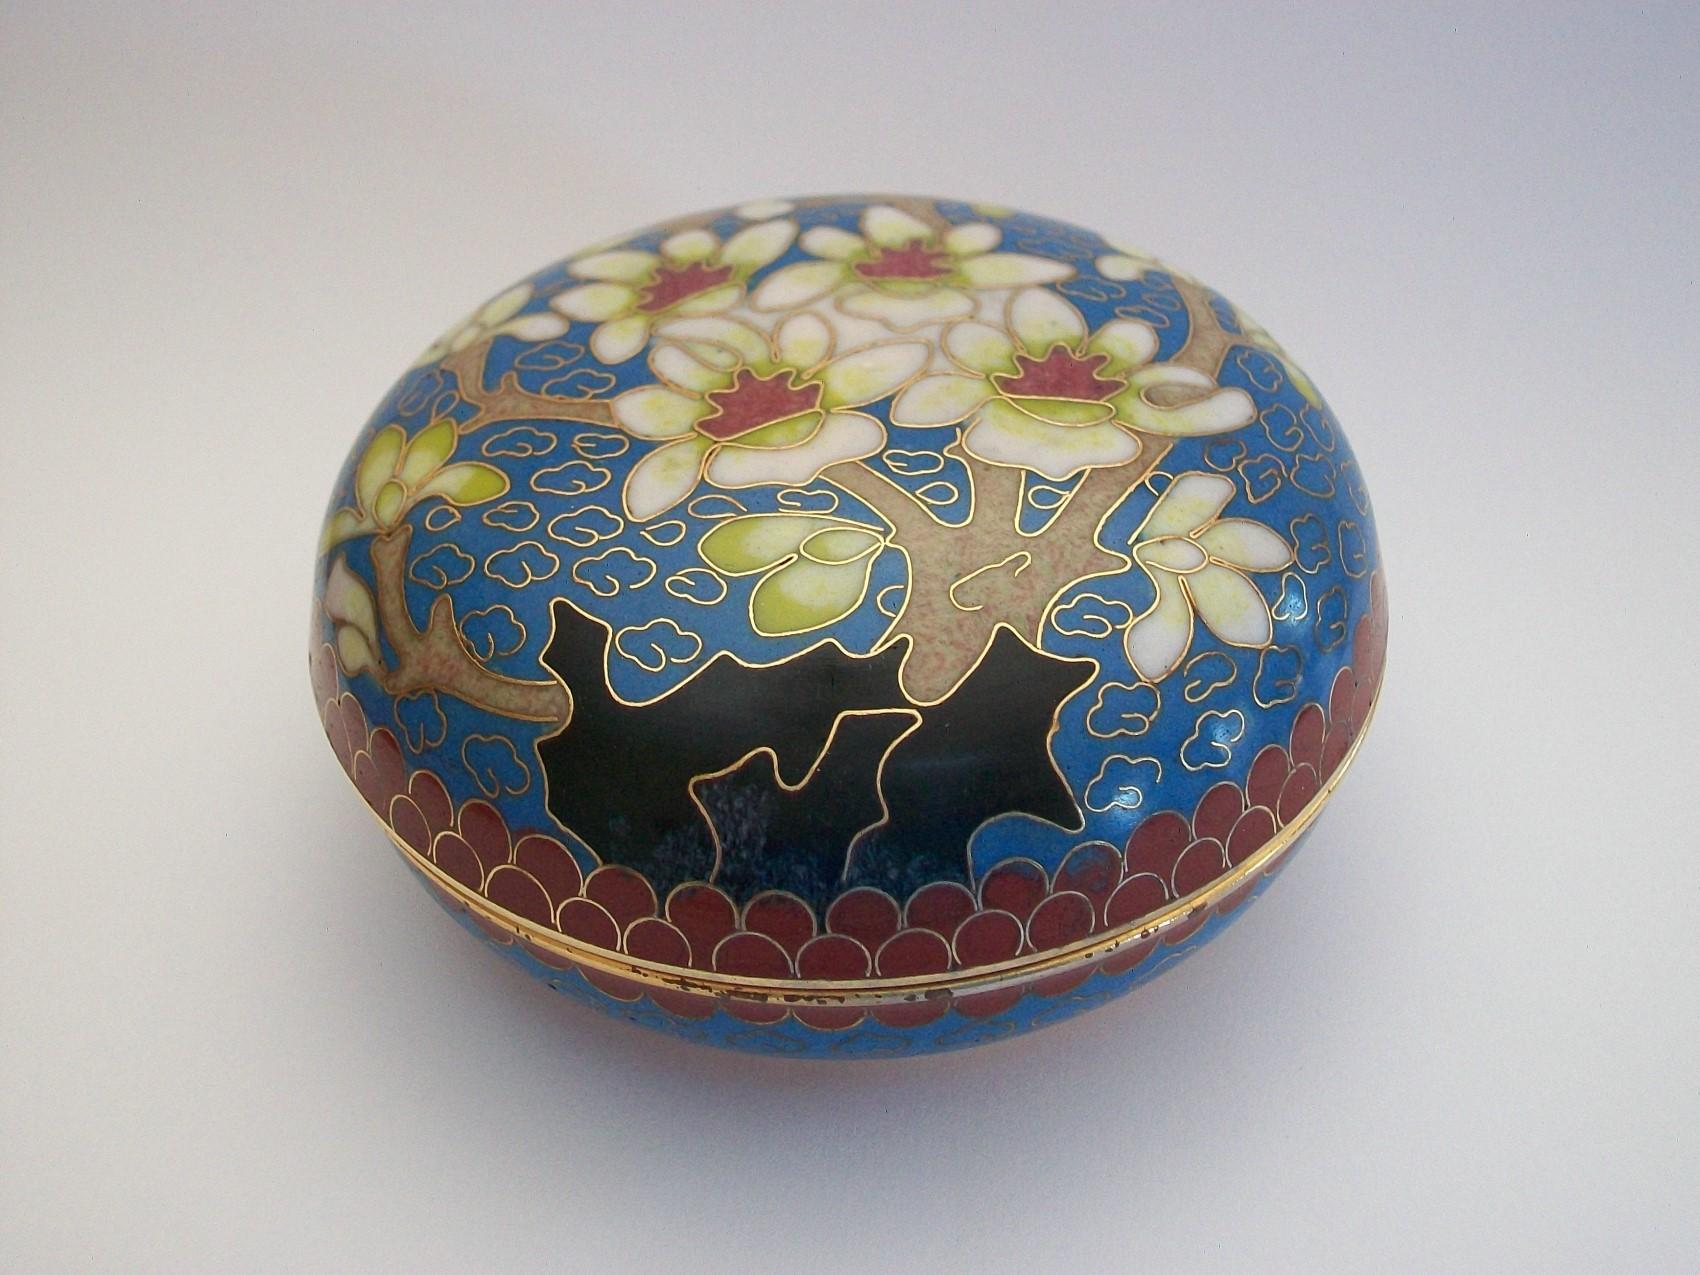 Vintage bronze cloisonne lacquer powder box featuring Prunus blossoms - removeable lid - unsigned - China - mid 20th century.

Excellent vintage condition - no loss - no damage - no restoration - wear to the gilt bronze and surface scratches from